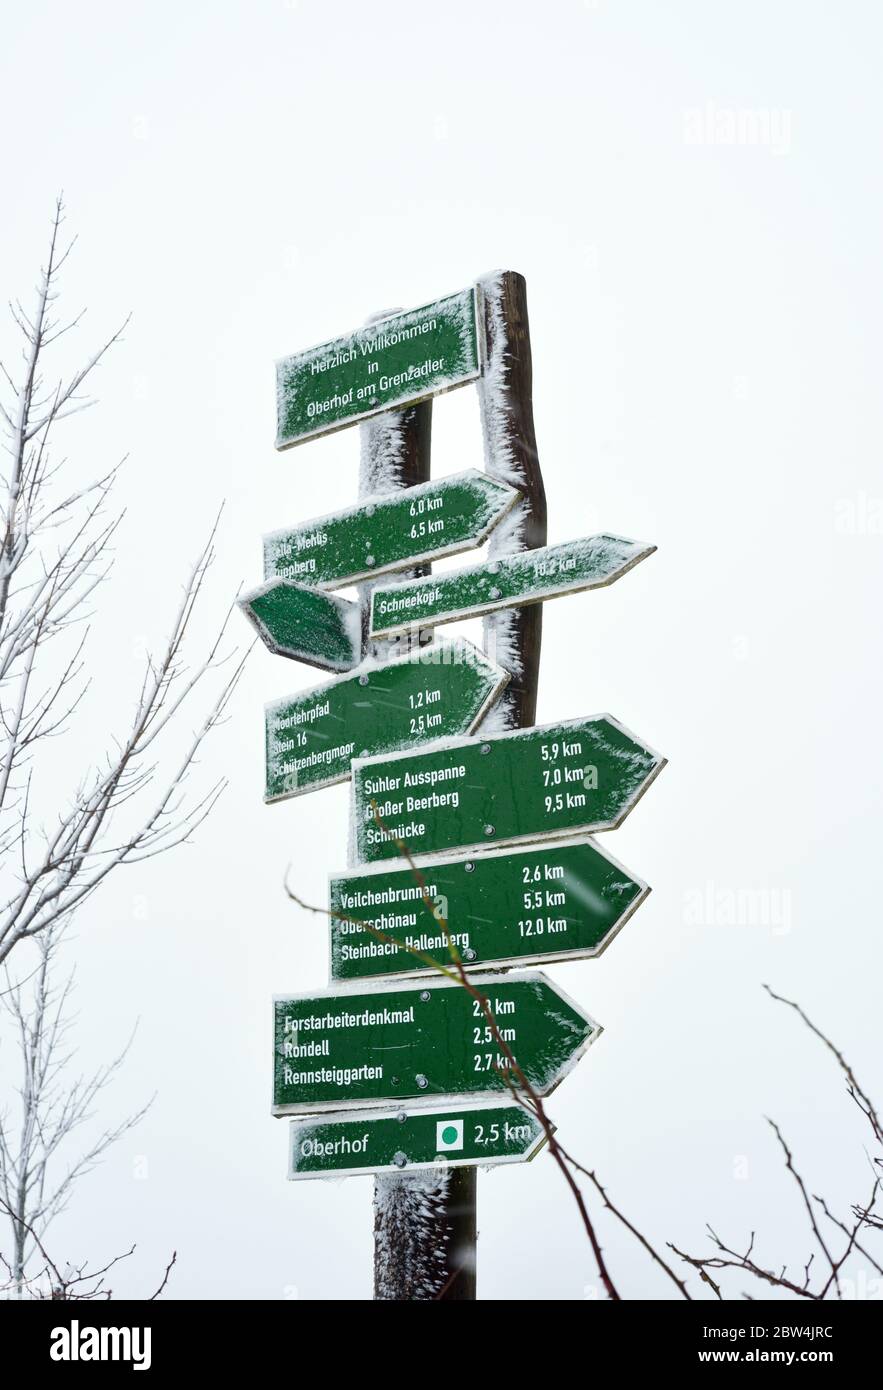 Oberhof, Germany 21-14-2019 wooden signs of hiking paths covered with snow indicates directions, mountains, villages around the Rennsteig area in the Stock Photo